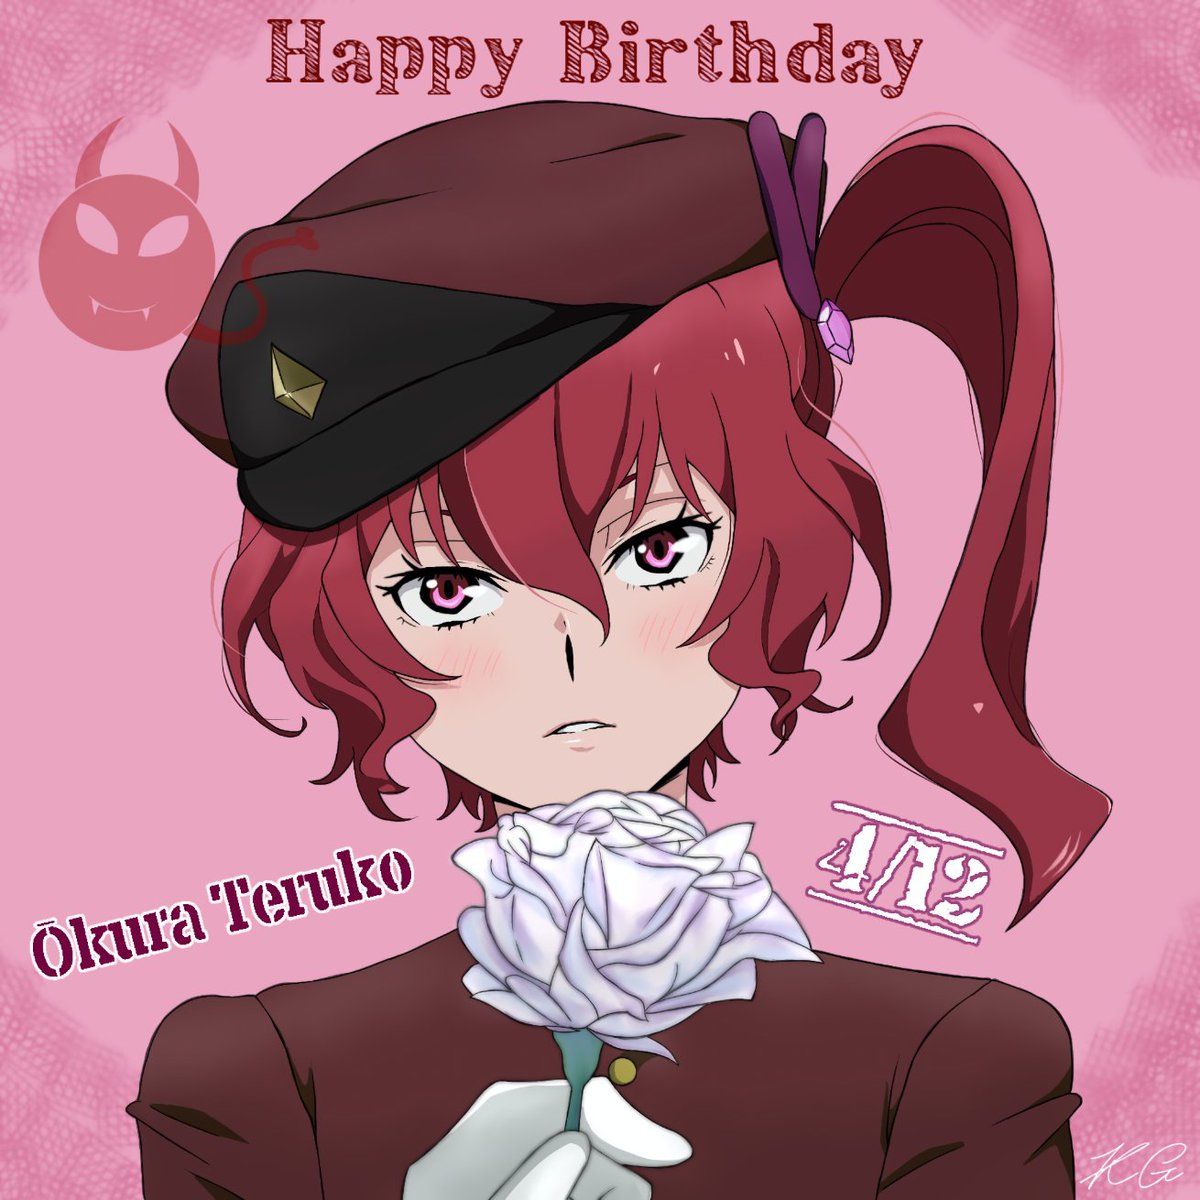 It's April 12th and I made this drawing to celebrate Teruko's birthday!

#anime #bungoustraydogs #bsd #terukookura #okurateruko #teruko #okura #bsdteruko #bsdokura #terukobsd #okurabsd #bsdfanart #fanart #bungoustraydogsfanart #birthdayanime #birthday